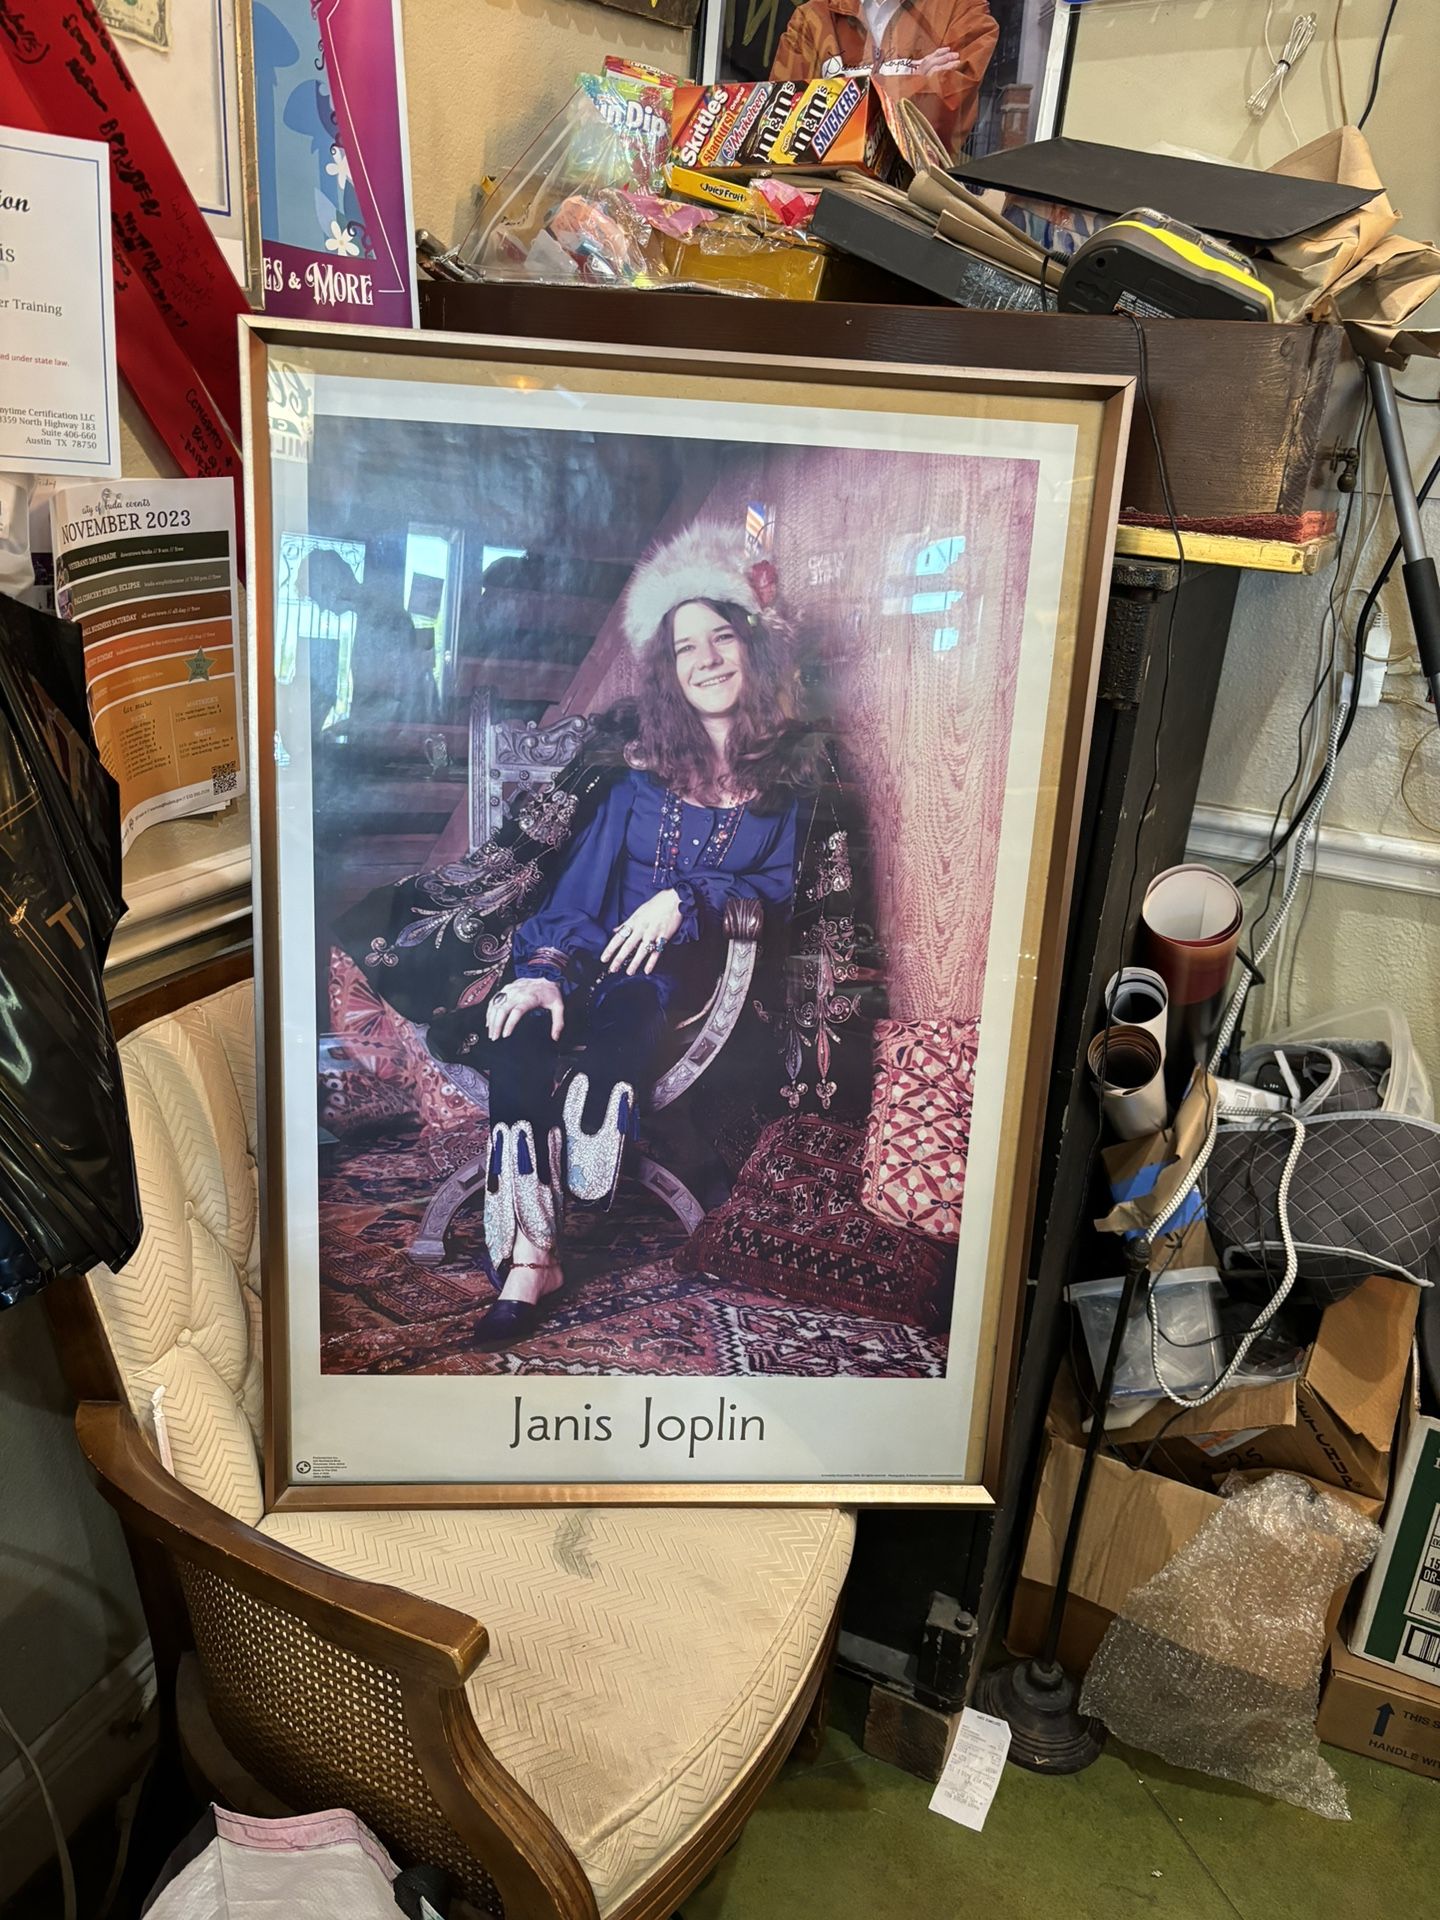 25x37 framed picture of THE GREAT JANIS JOPLIN!  What a lady!  85.00.  Johanna at Antiques and More. Located at 316b Main Street Buda. Antiques vintag